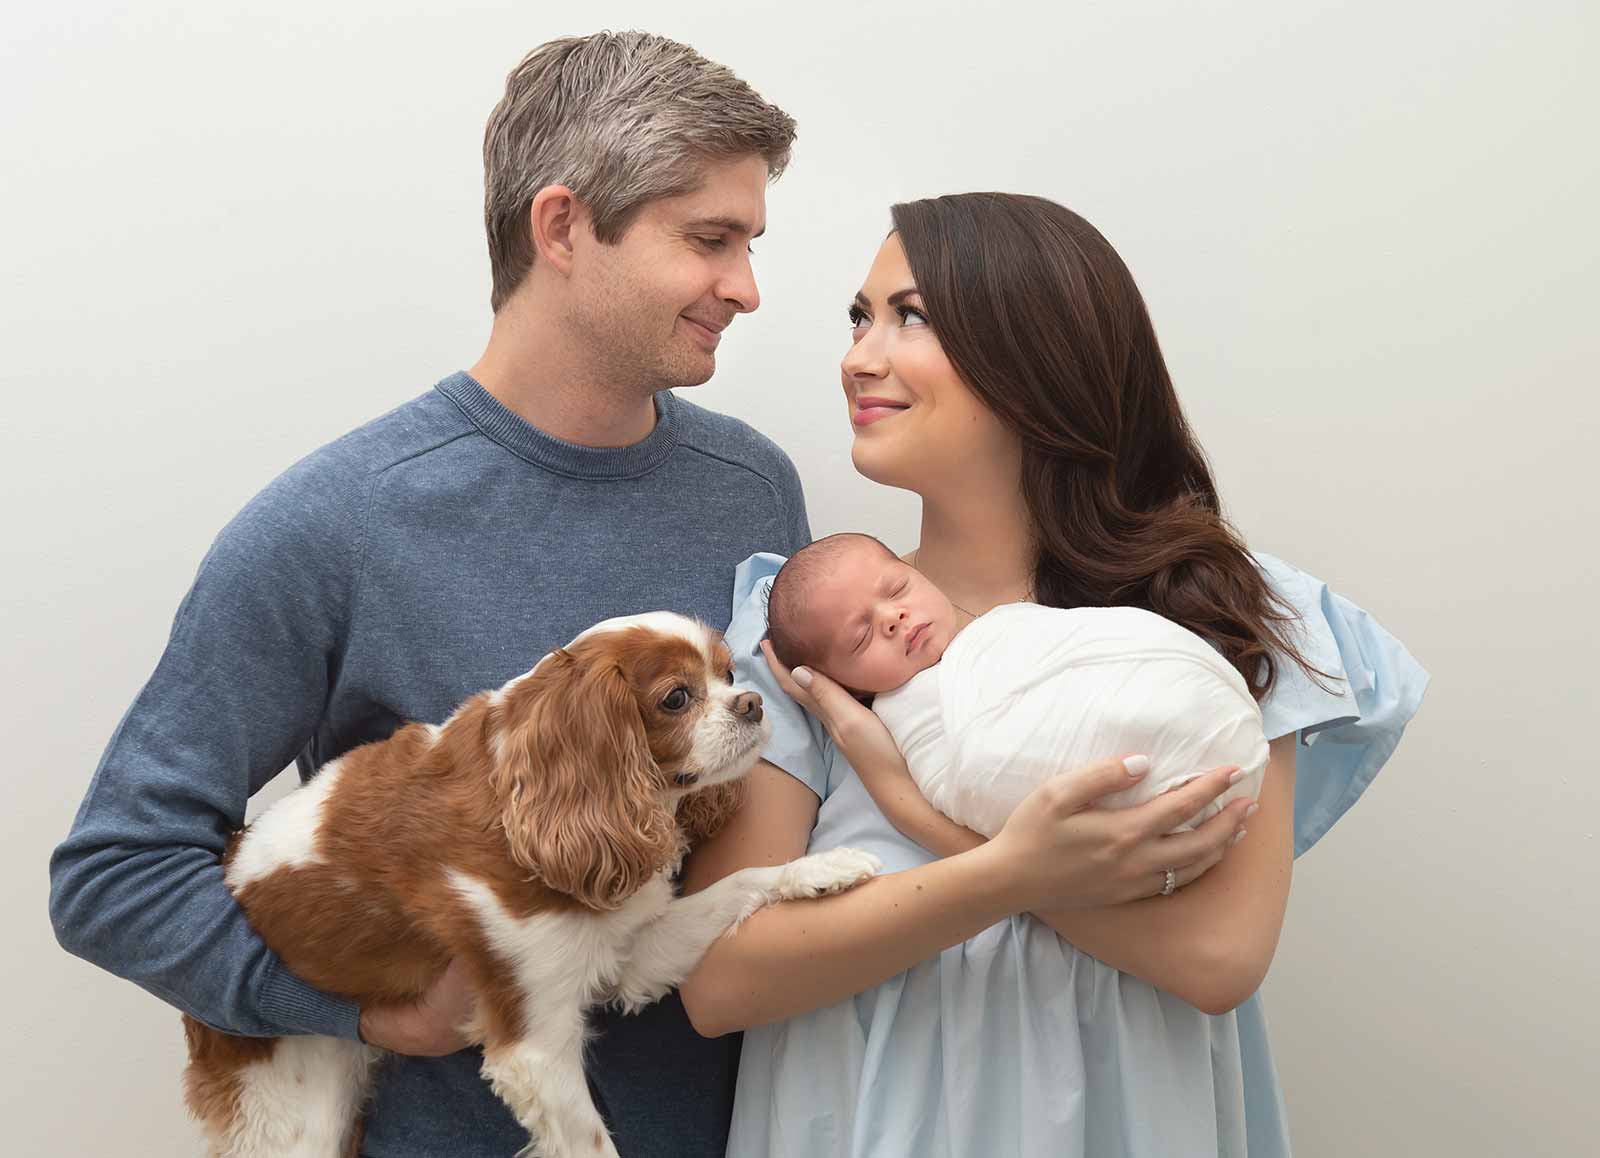 Mother and father looking at each other while holding dog and newborn